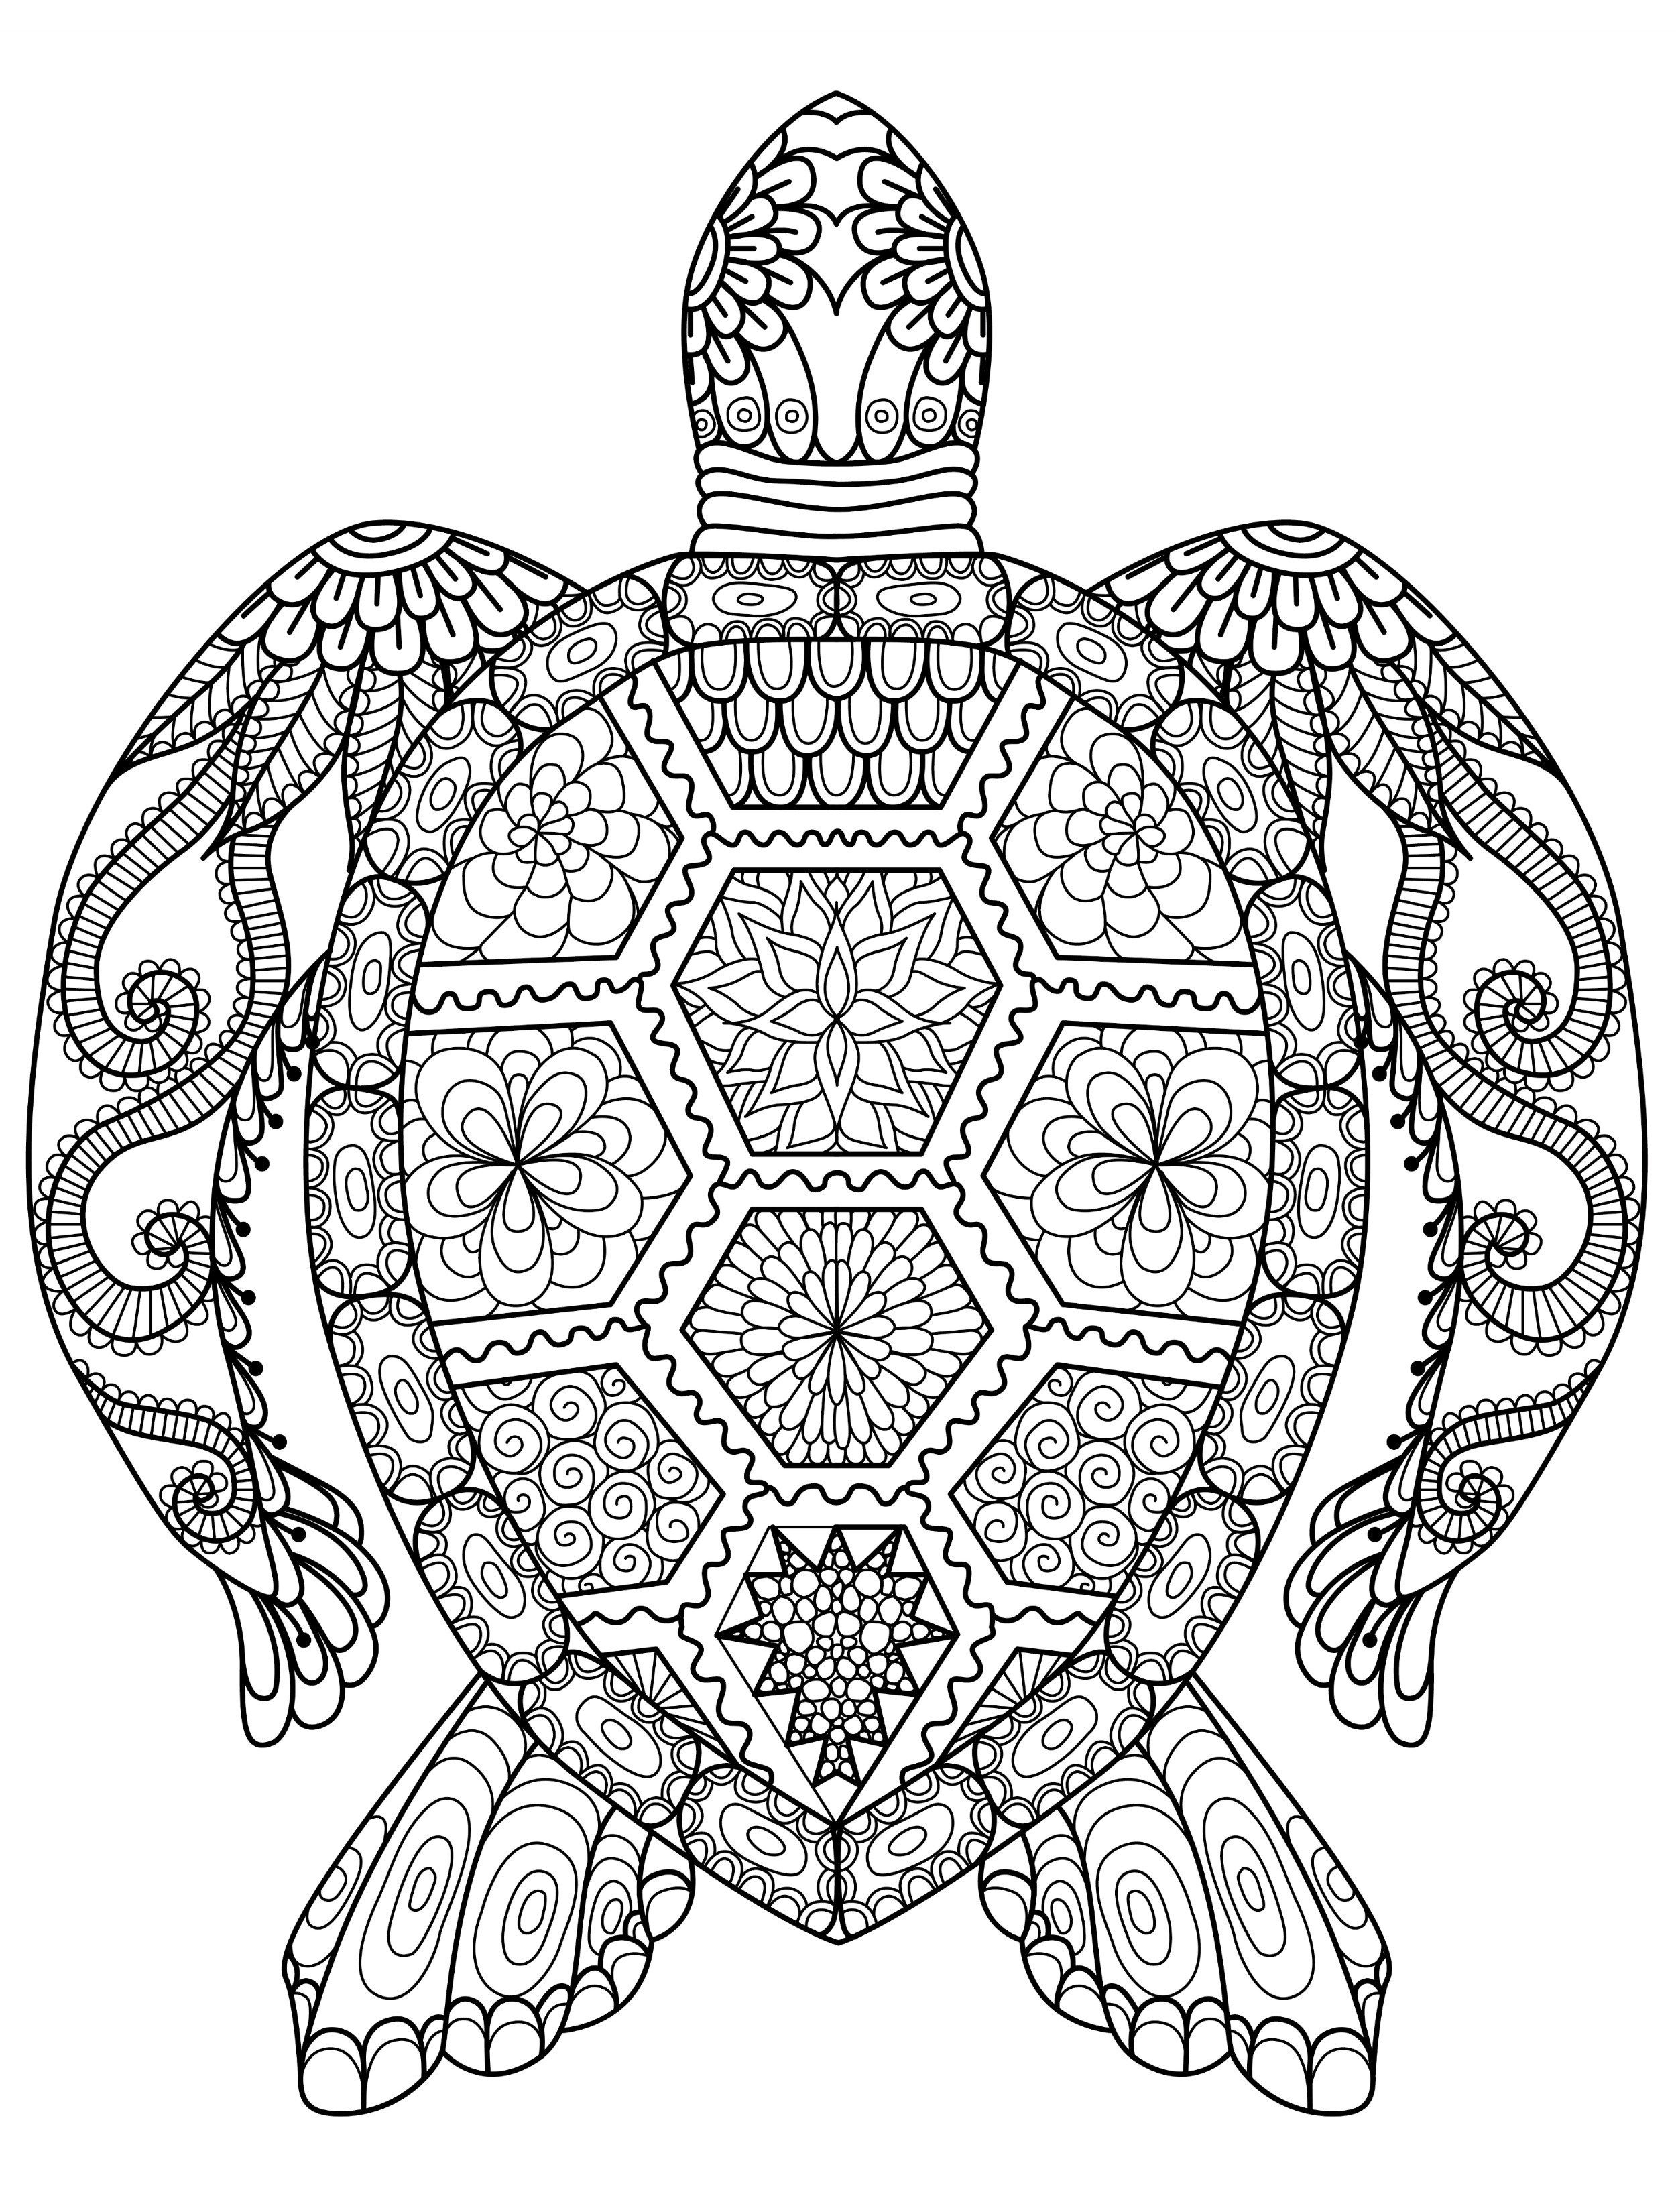 20 Gorgeous Free Printable Adult Coloring Pages … | Adult Coloring - Free Printable Mandala Coloring Pages For Adults